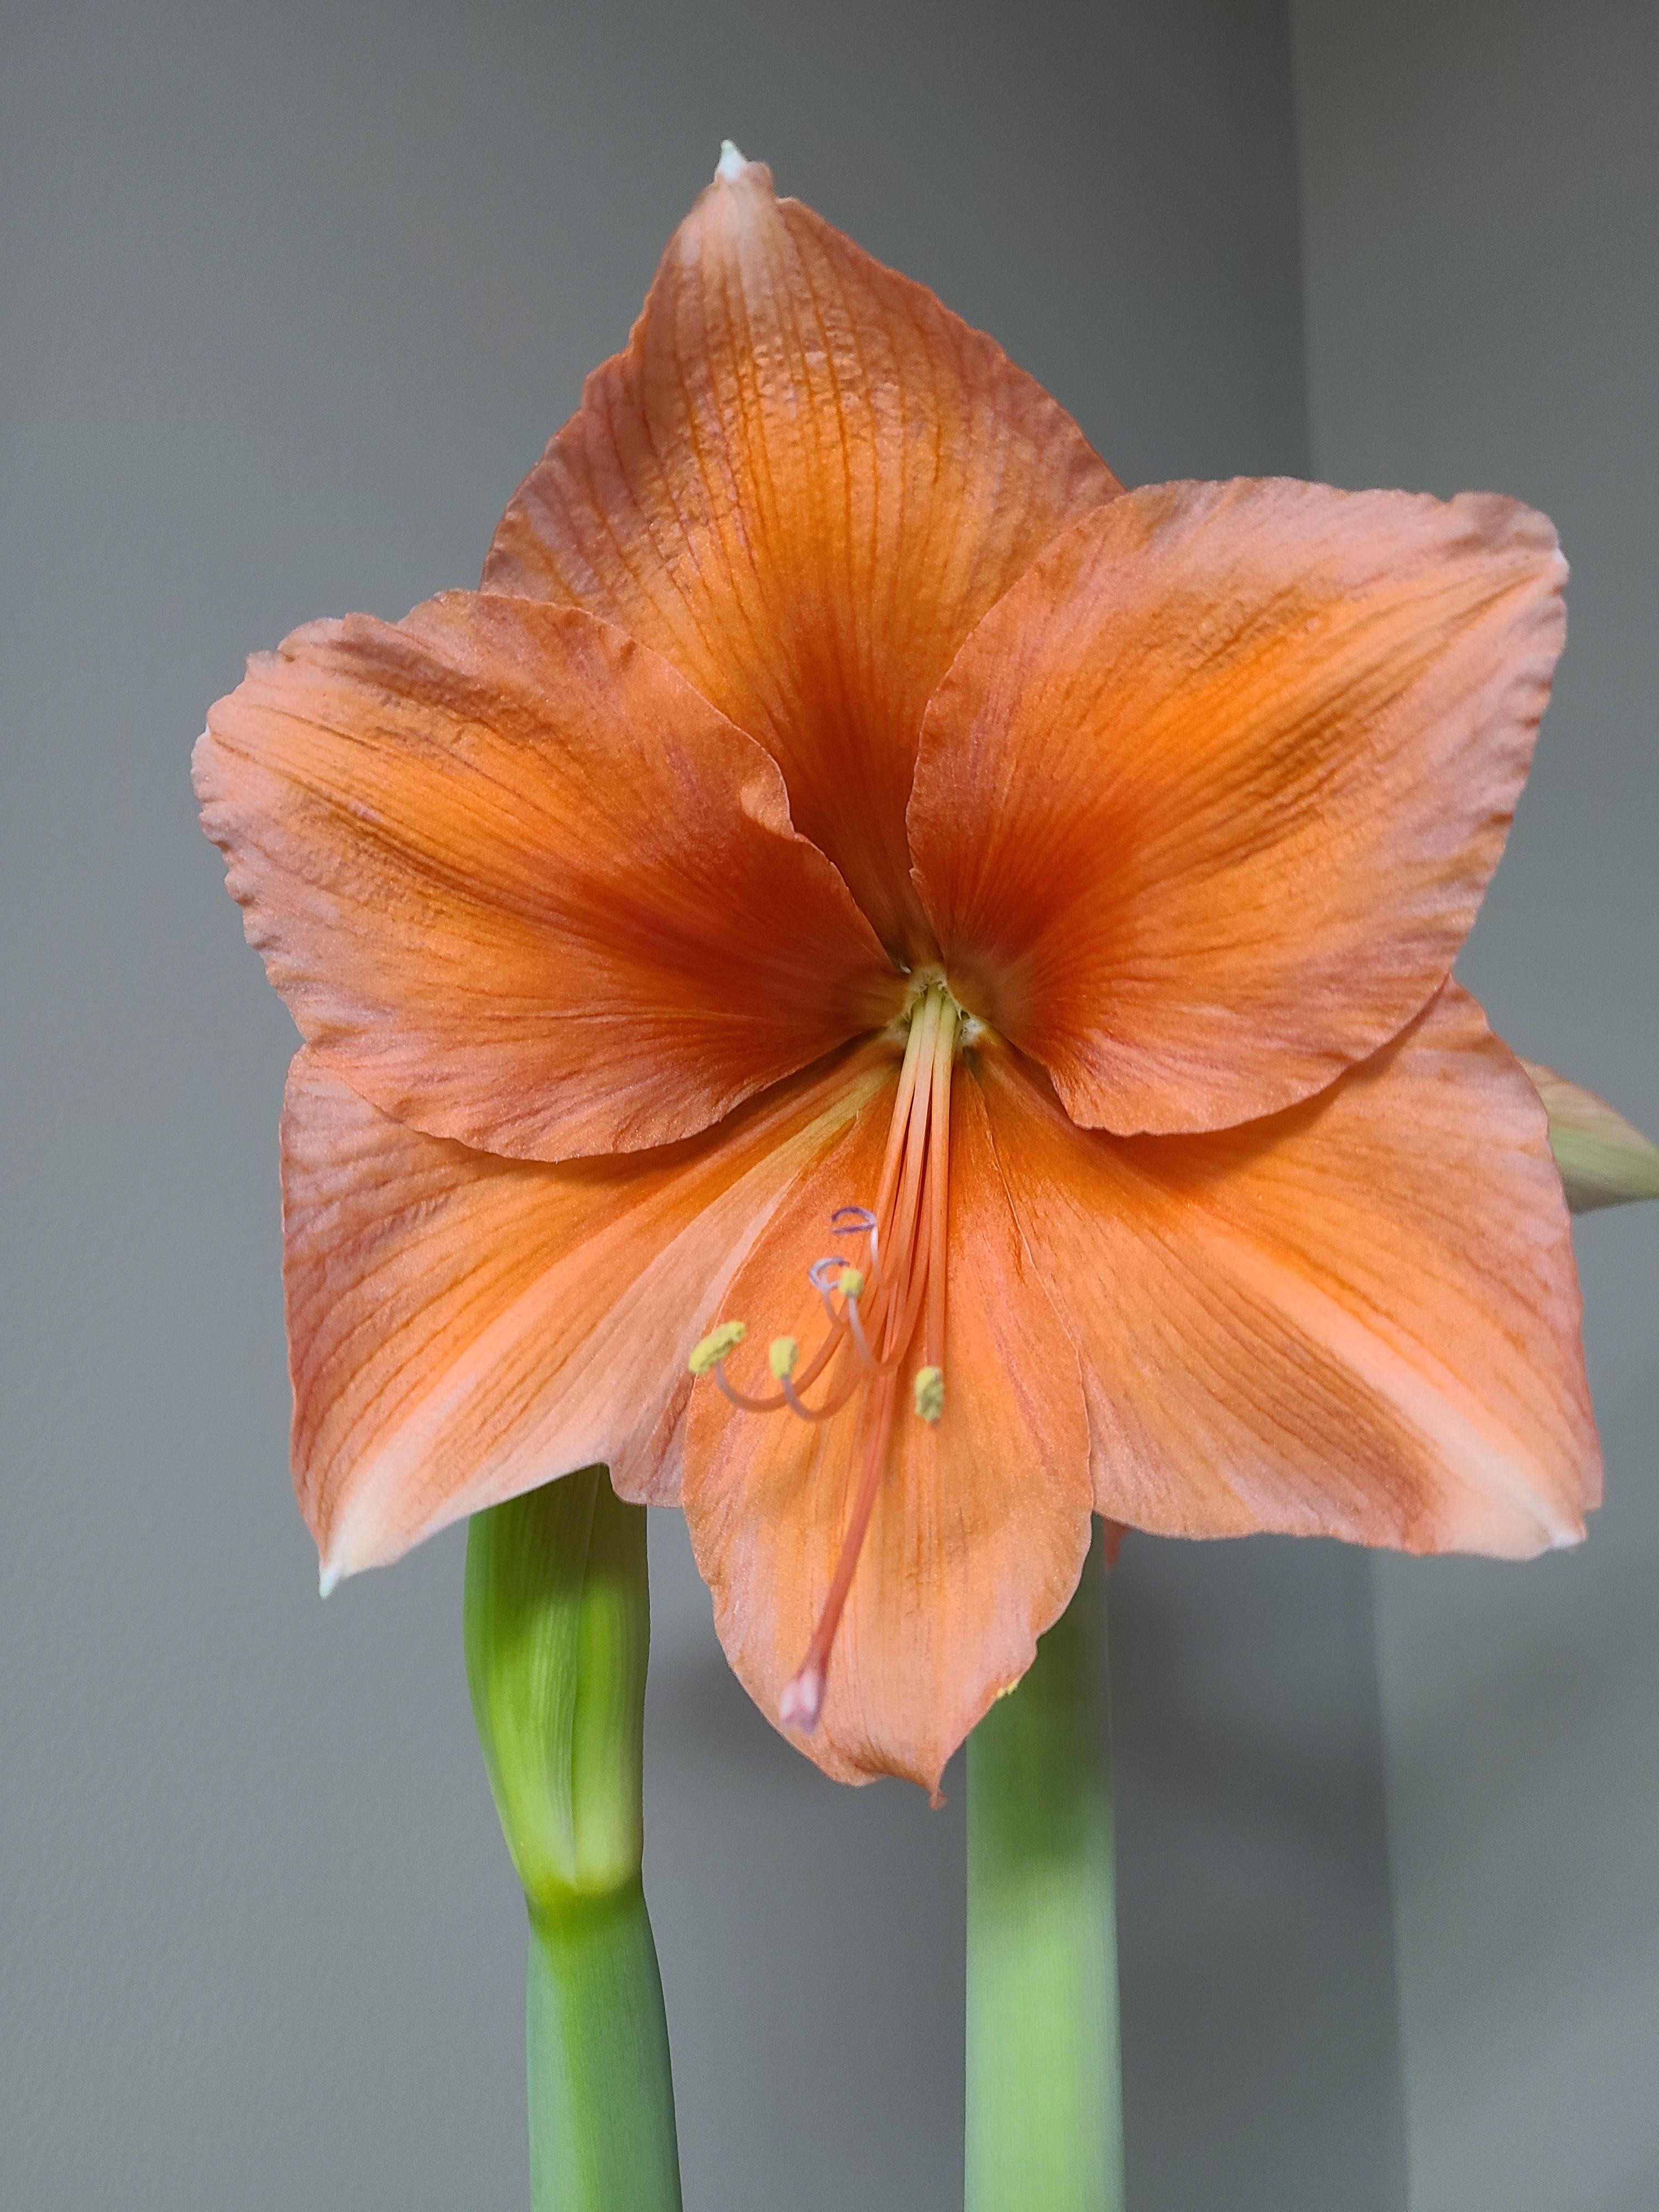 Hippeastrum Holland Bouquet from Leo Berbee Bulb Company